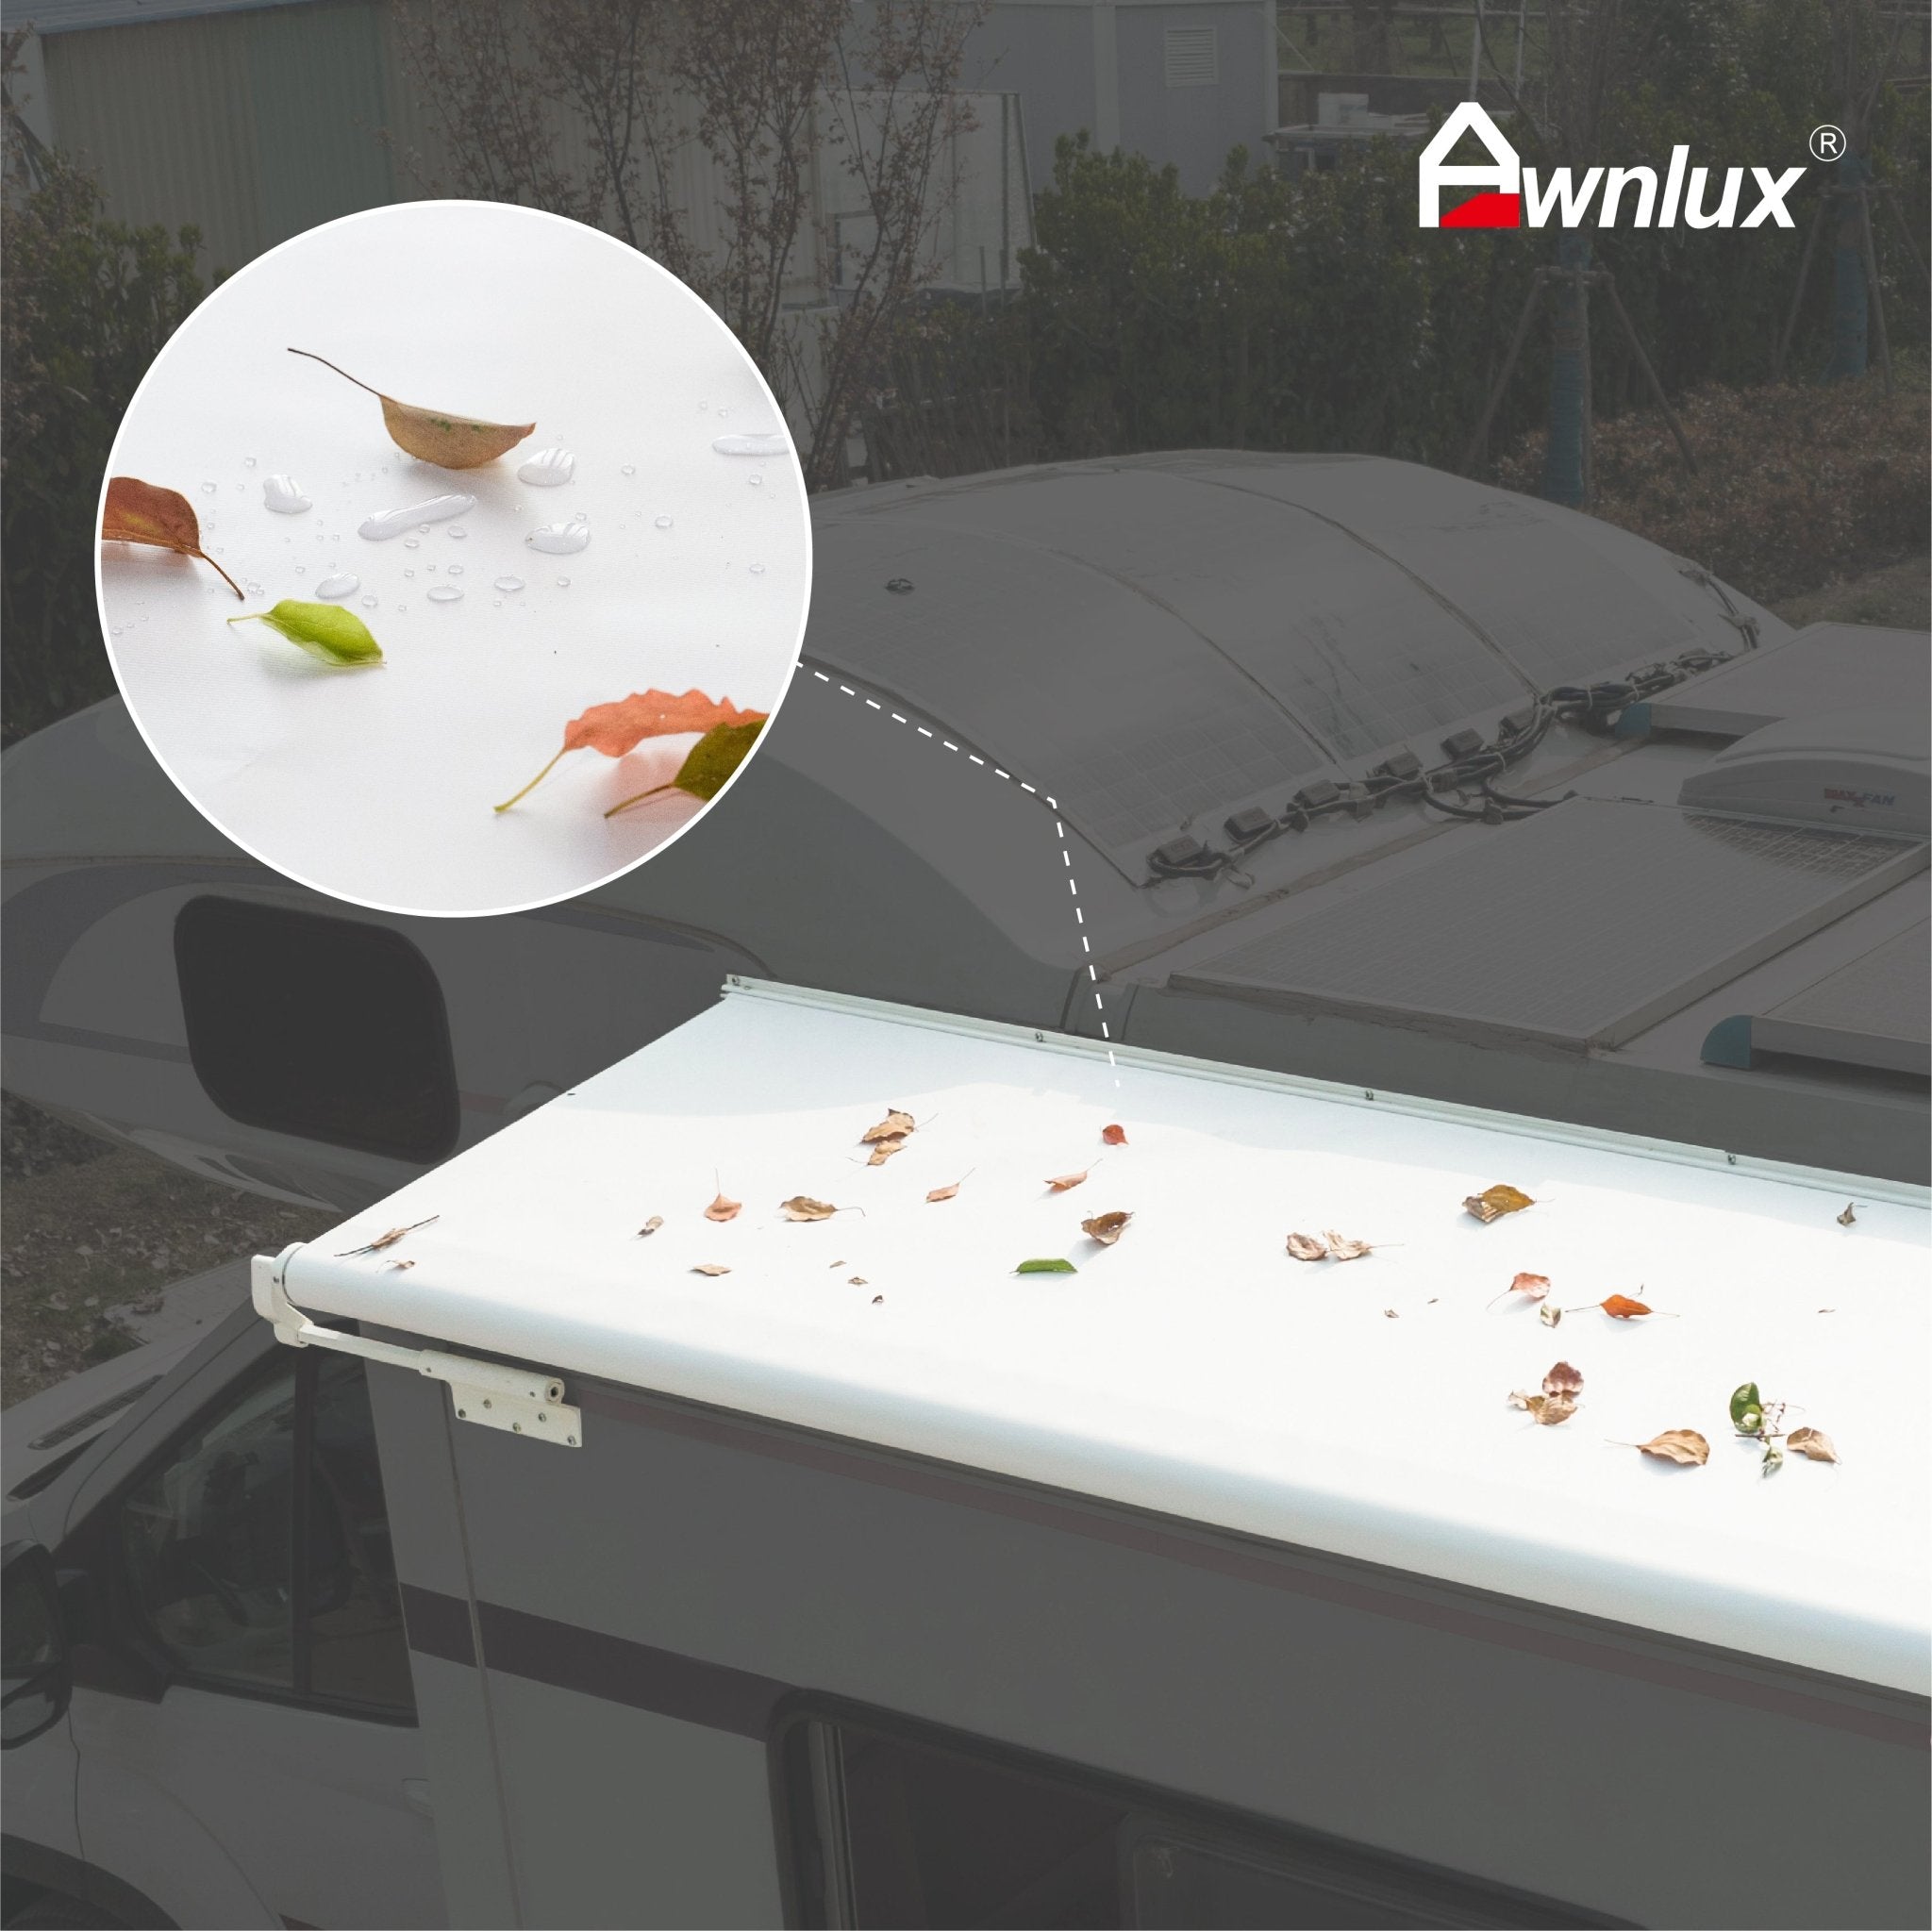 AWNLUX RV Slide Topper Awning Fabric Replacement - AWNLUX